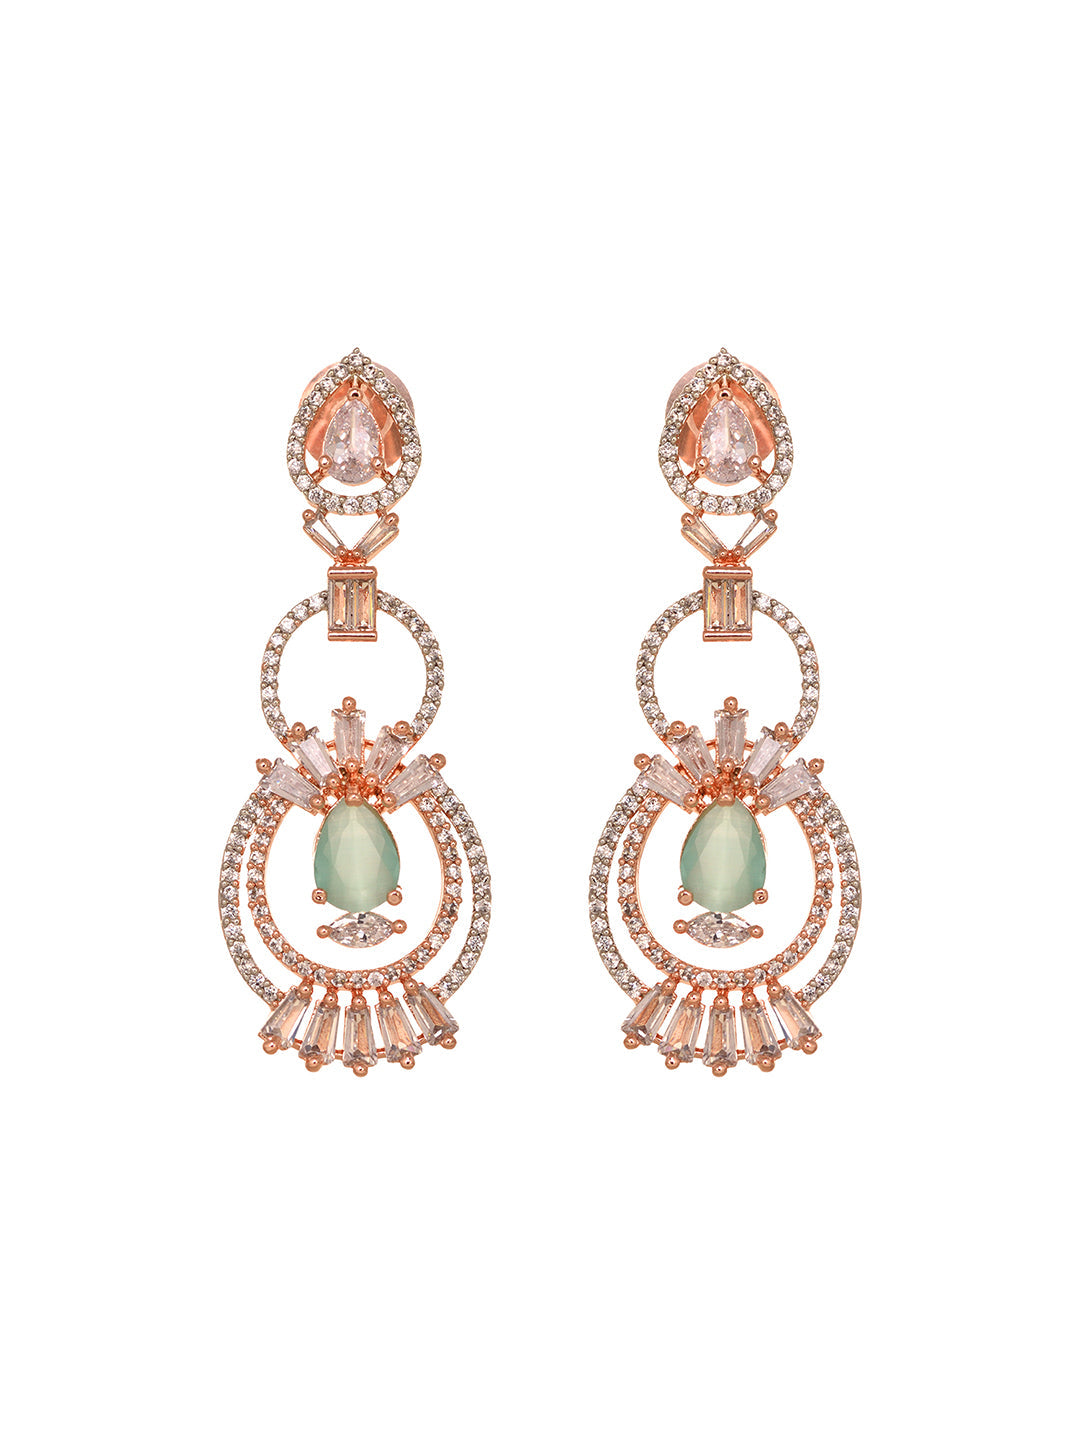 Rosegold Plated Mint AD studded Necklace Earrings Jewellery Set, zaveri pearls, sale price rs, sale price, sale gold plated, sale gold, sale, rubans, ring, regular price, priyassi jewellery, 